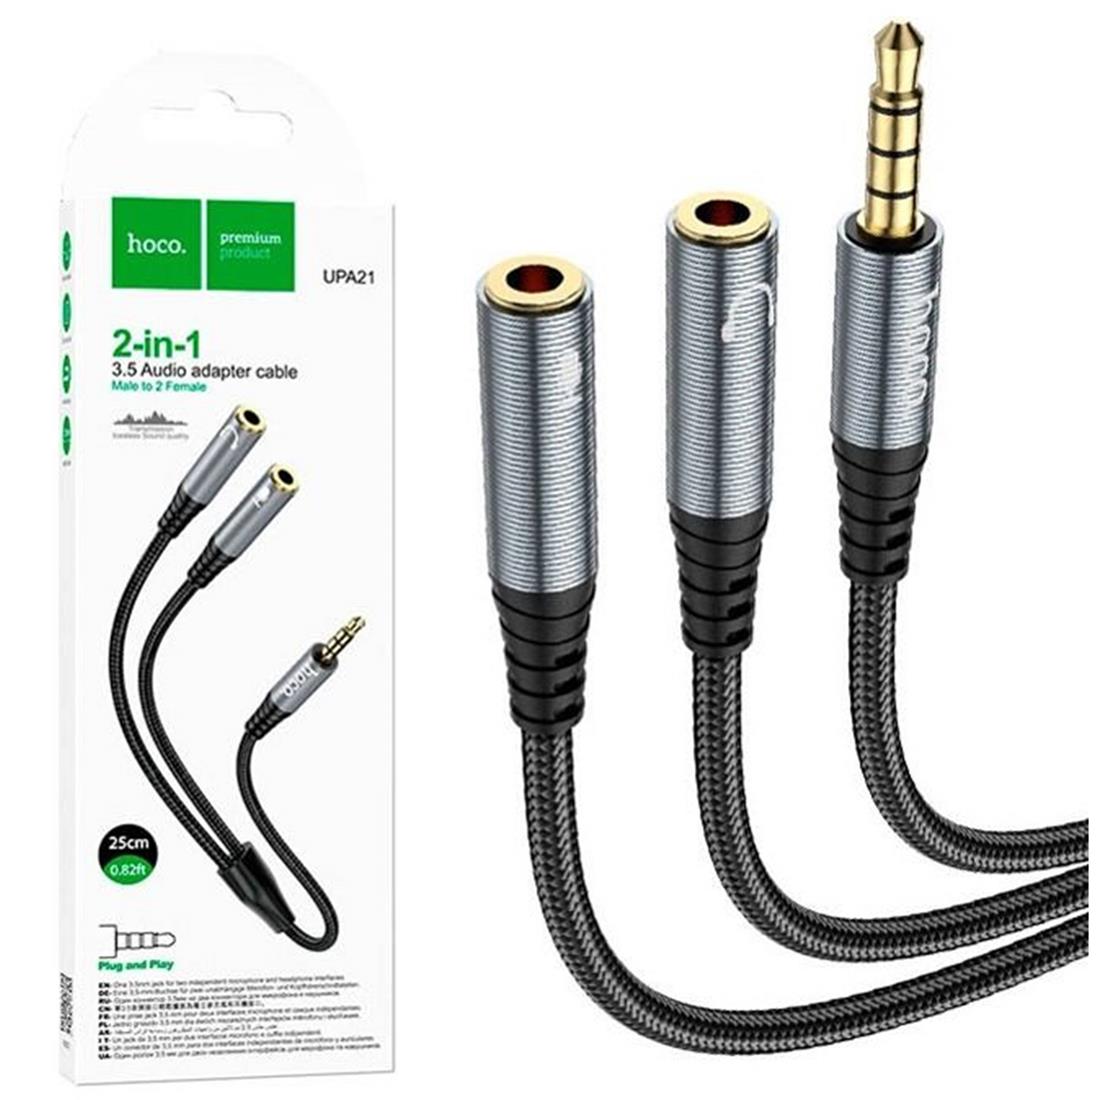 Cable audio adapter UPA21 3.5mm male to 2*3.5mm female - HOCO